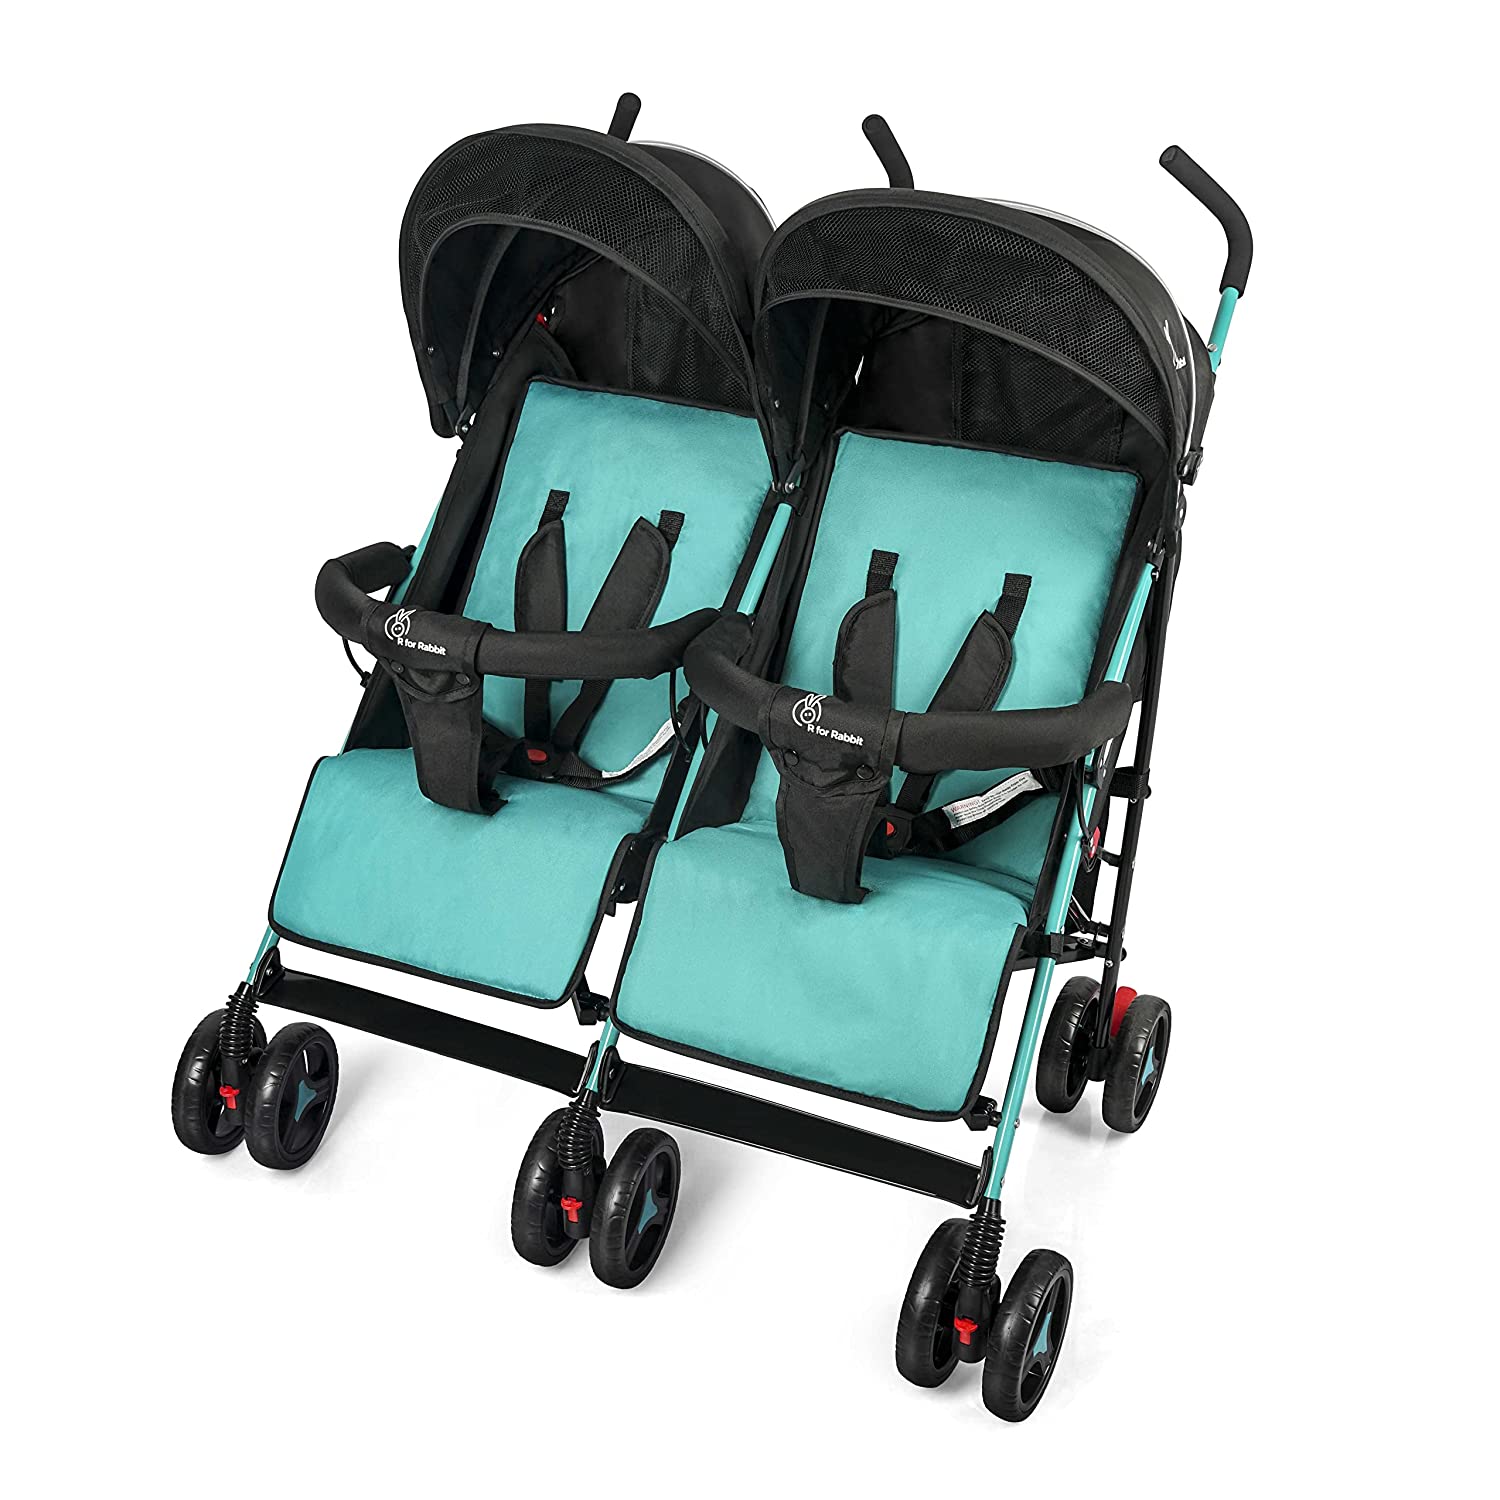 R for Rabbit Ginny and Johnny – Baby Twin Stroller